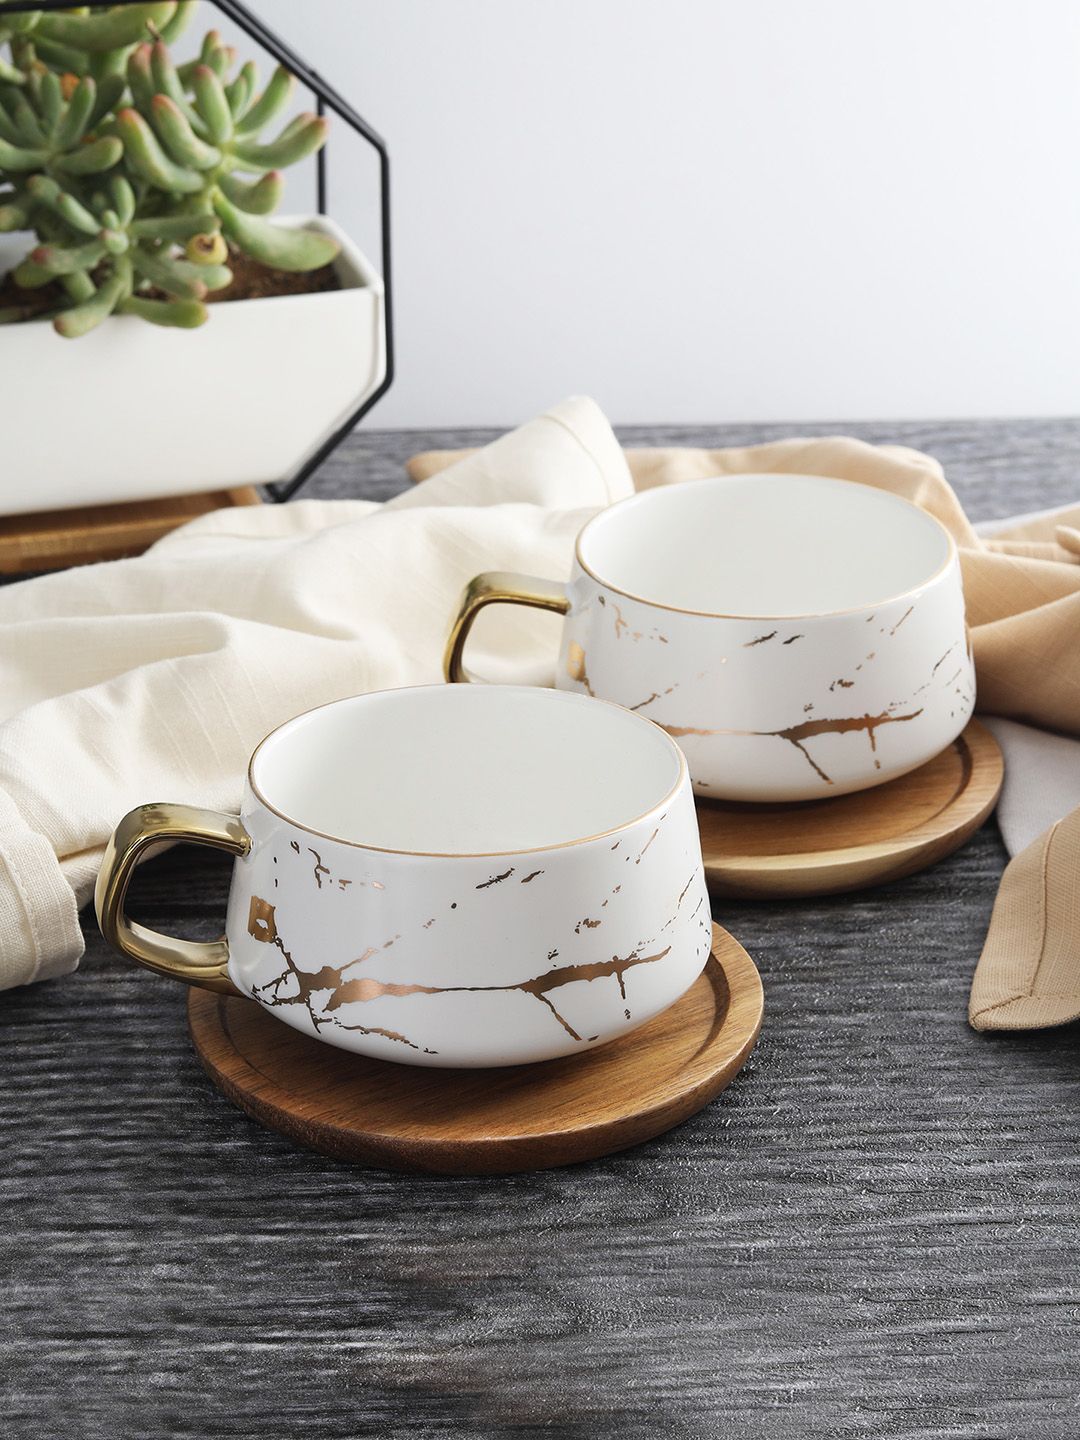 OddCroft White & Gold-Toned 2-Pieces Printed Ceramic Tea Cups & Saucer Price in India